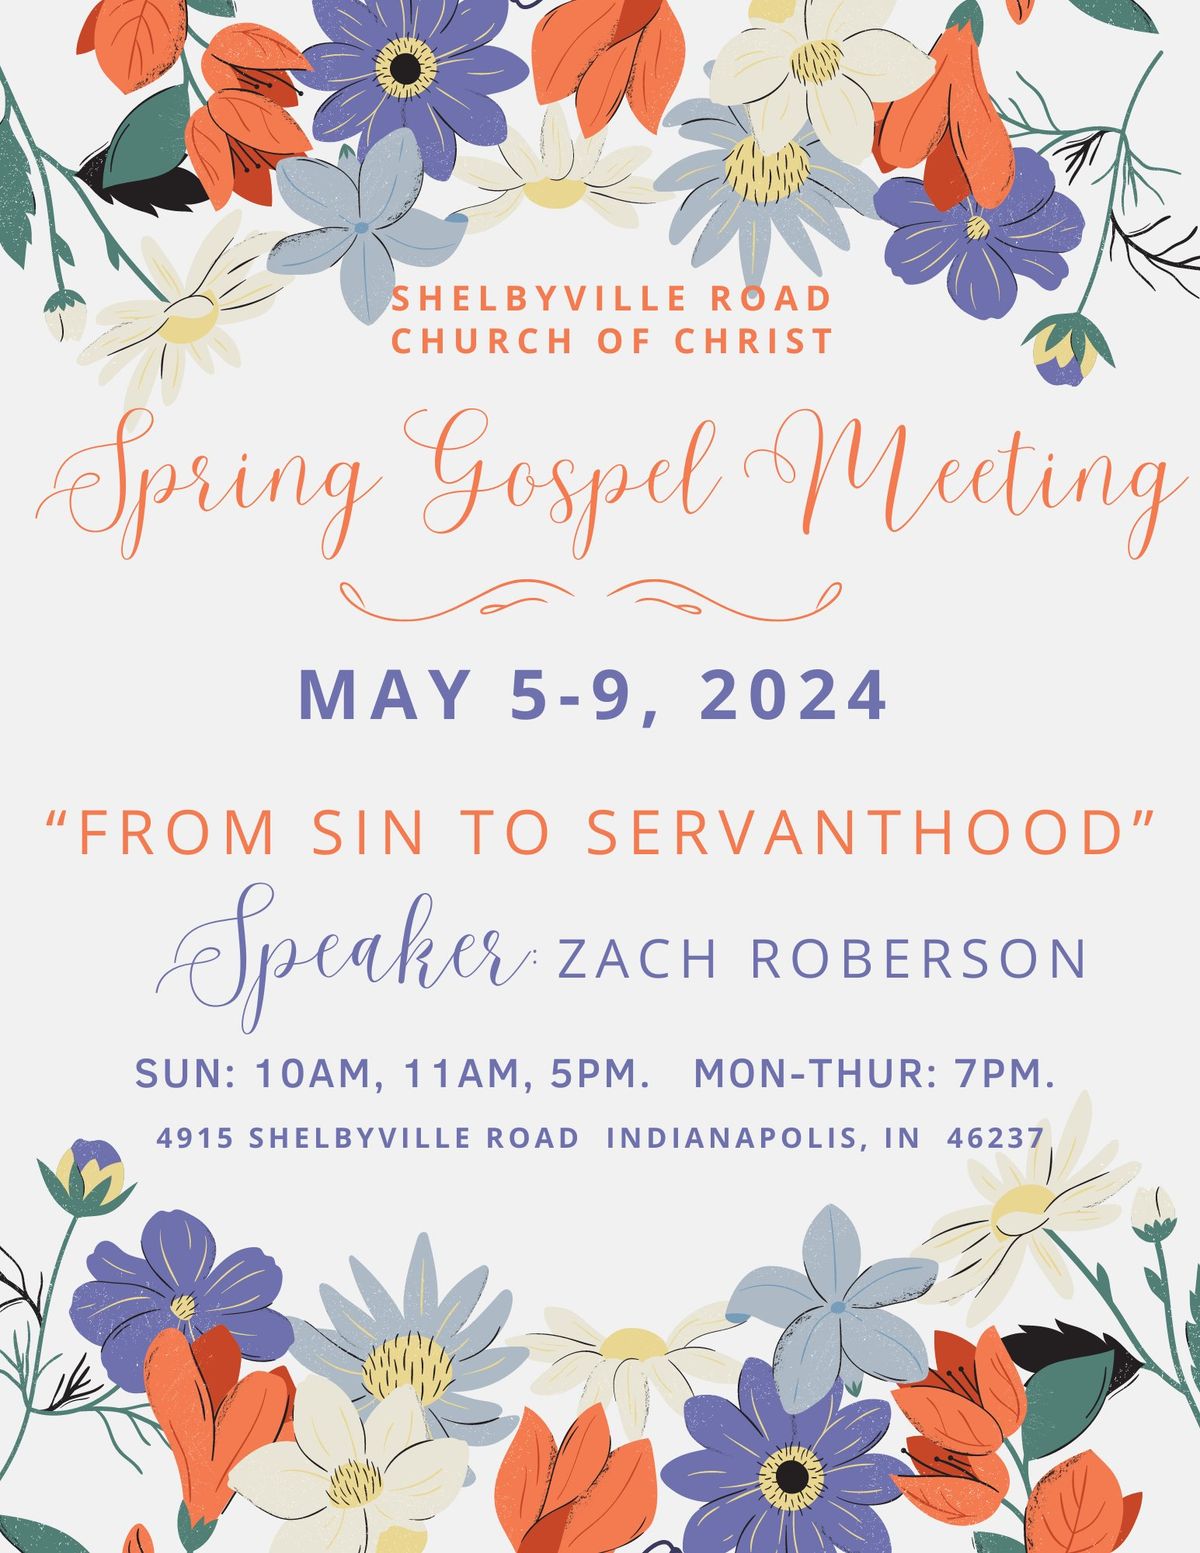 Spring Gospel Meeting with Zach Roberson